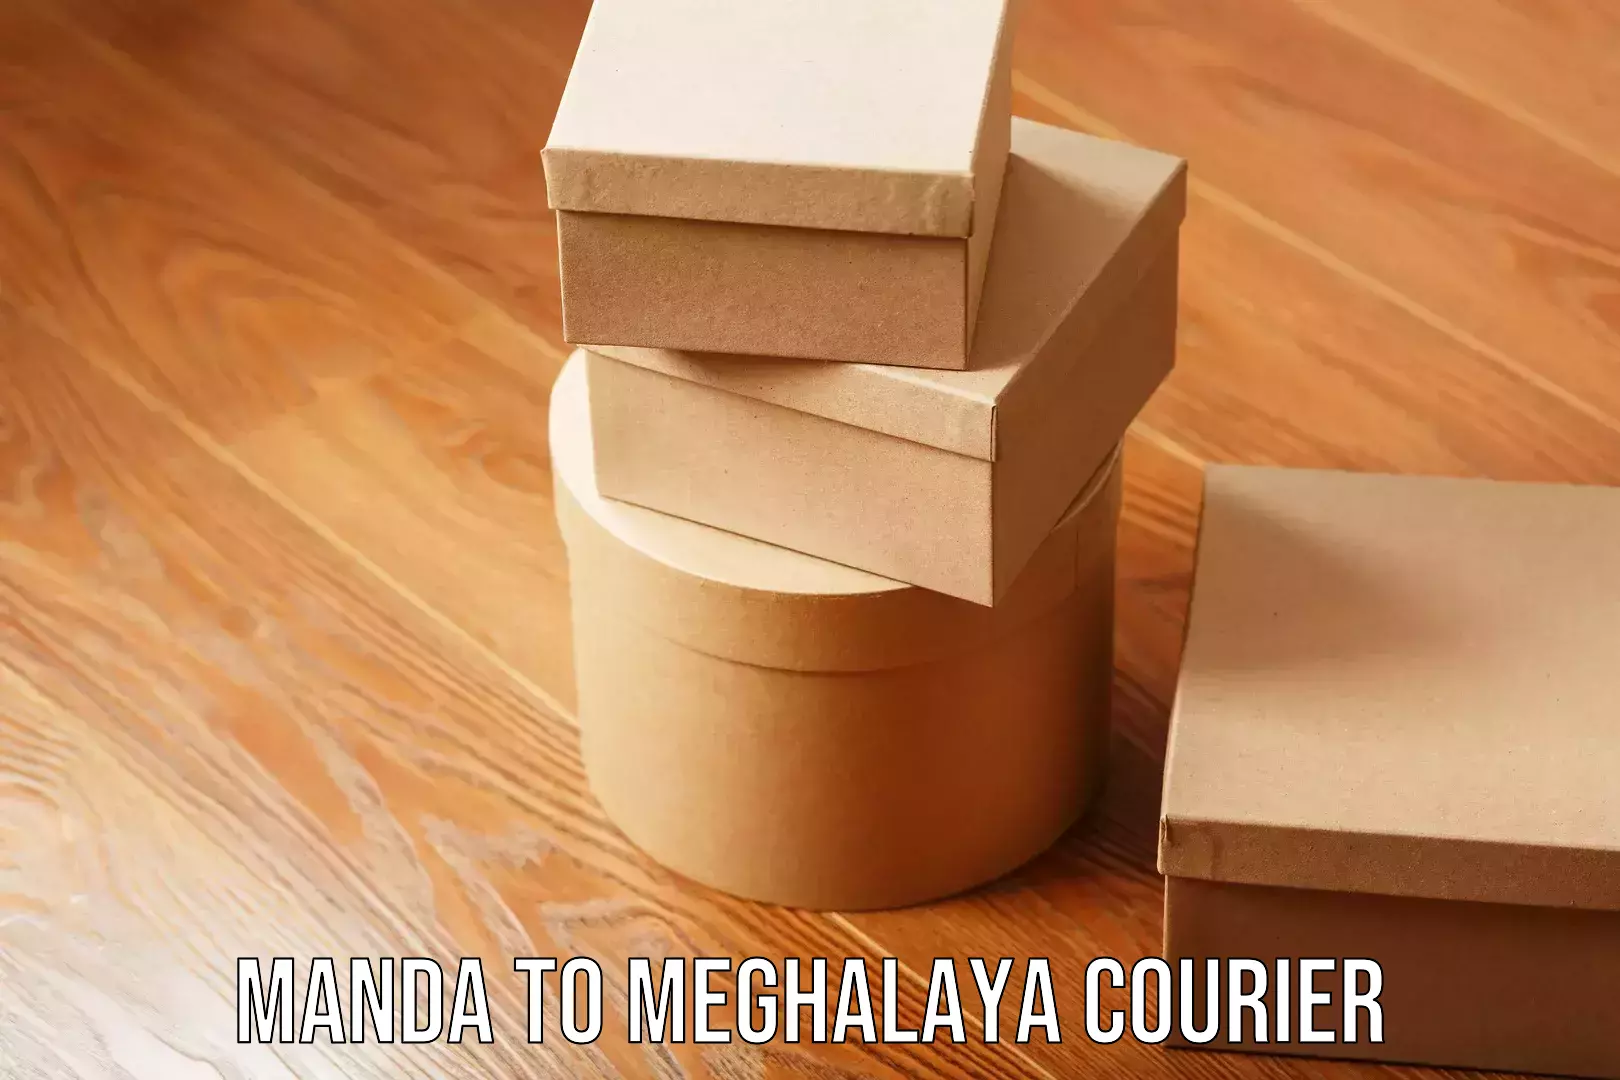 Professional relocation services in Manda to Meghalaya